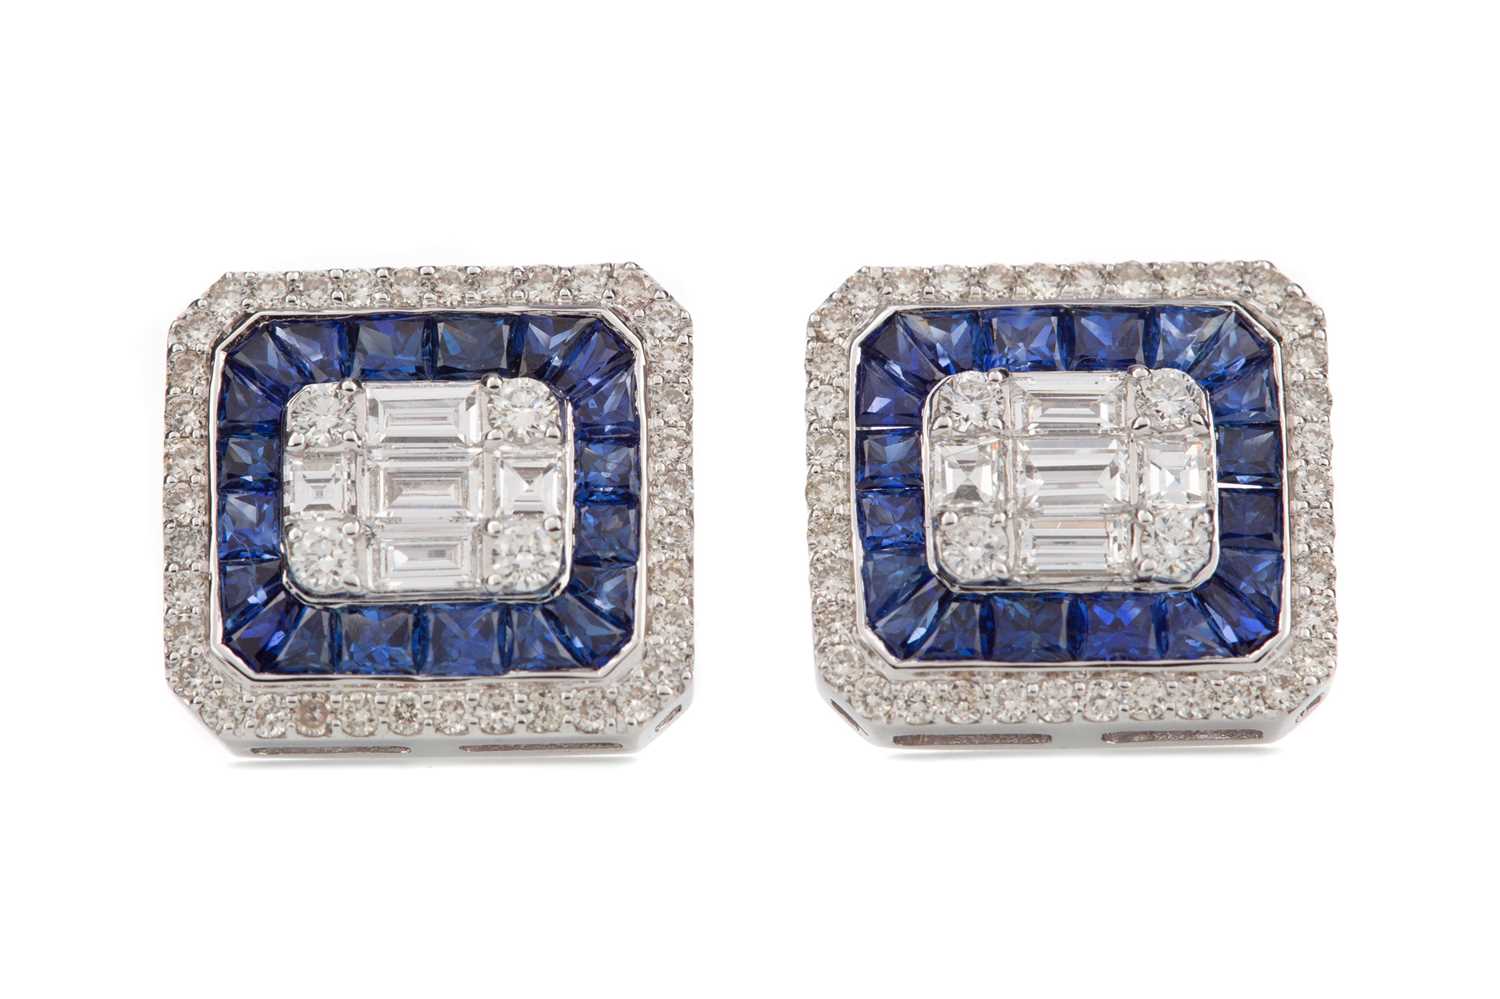 Lot 1528 - A PAIR OF SAPPHIRE AND DIAMOND EARRINGS